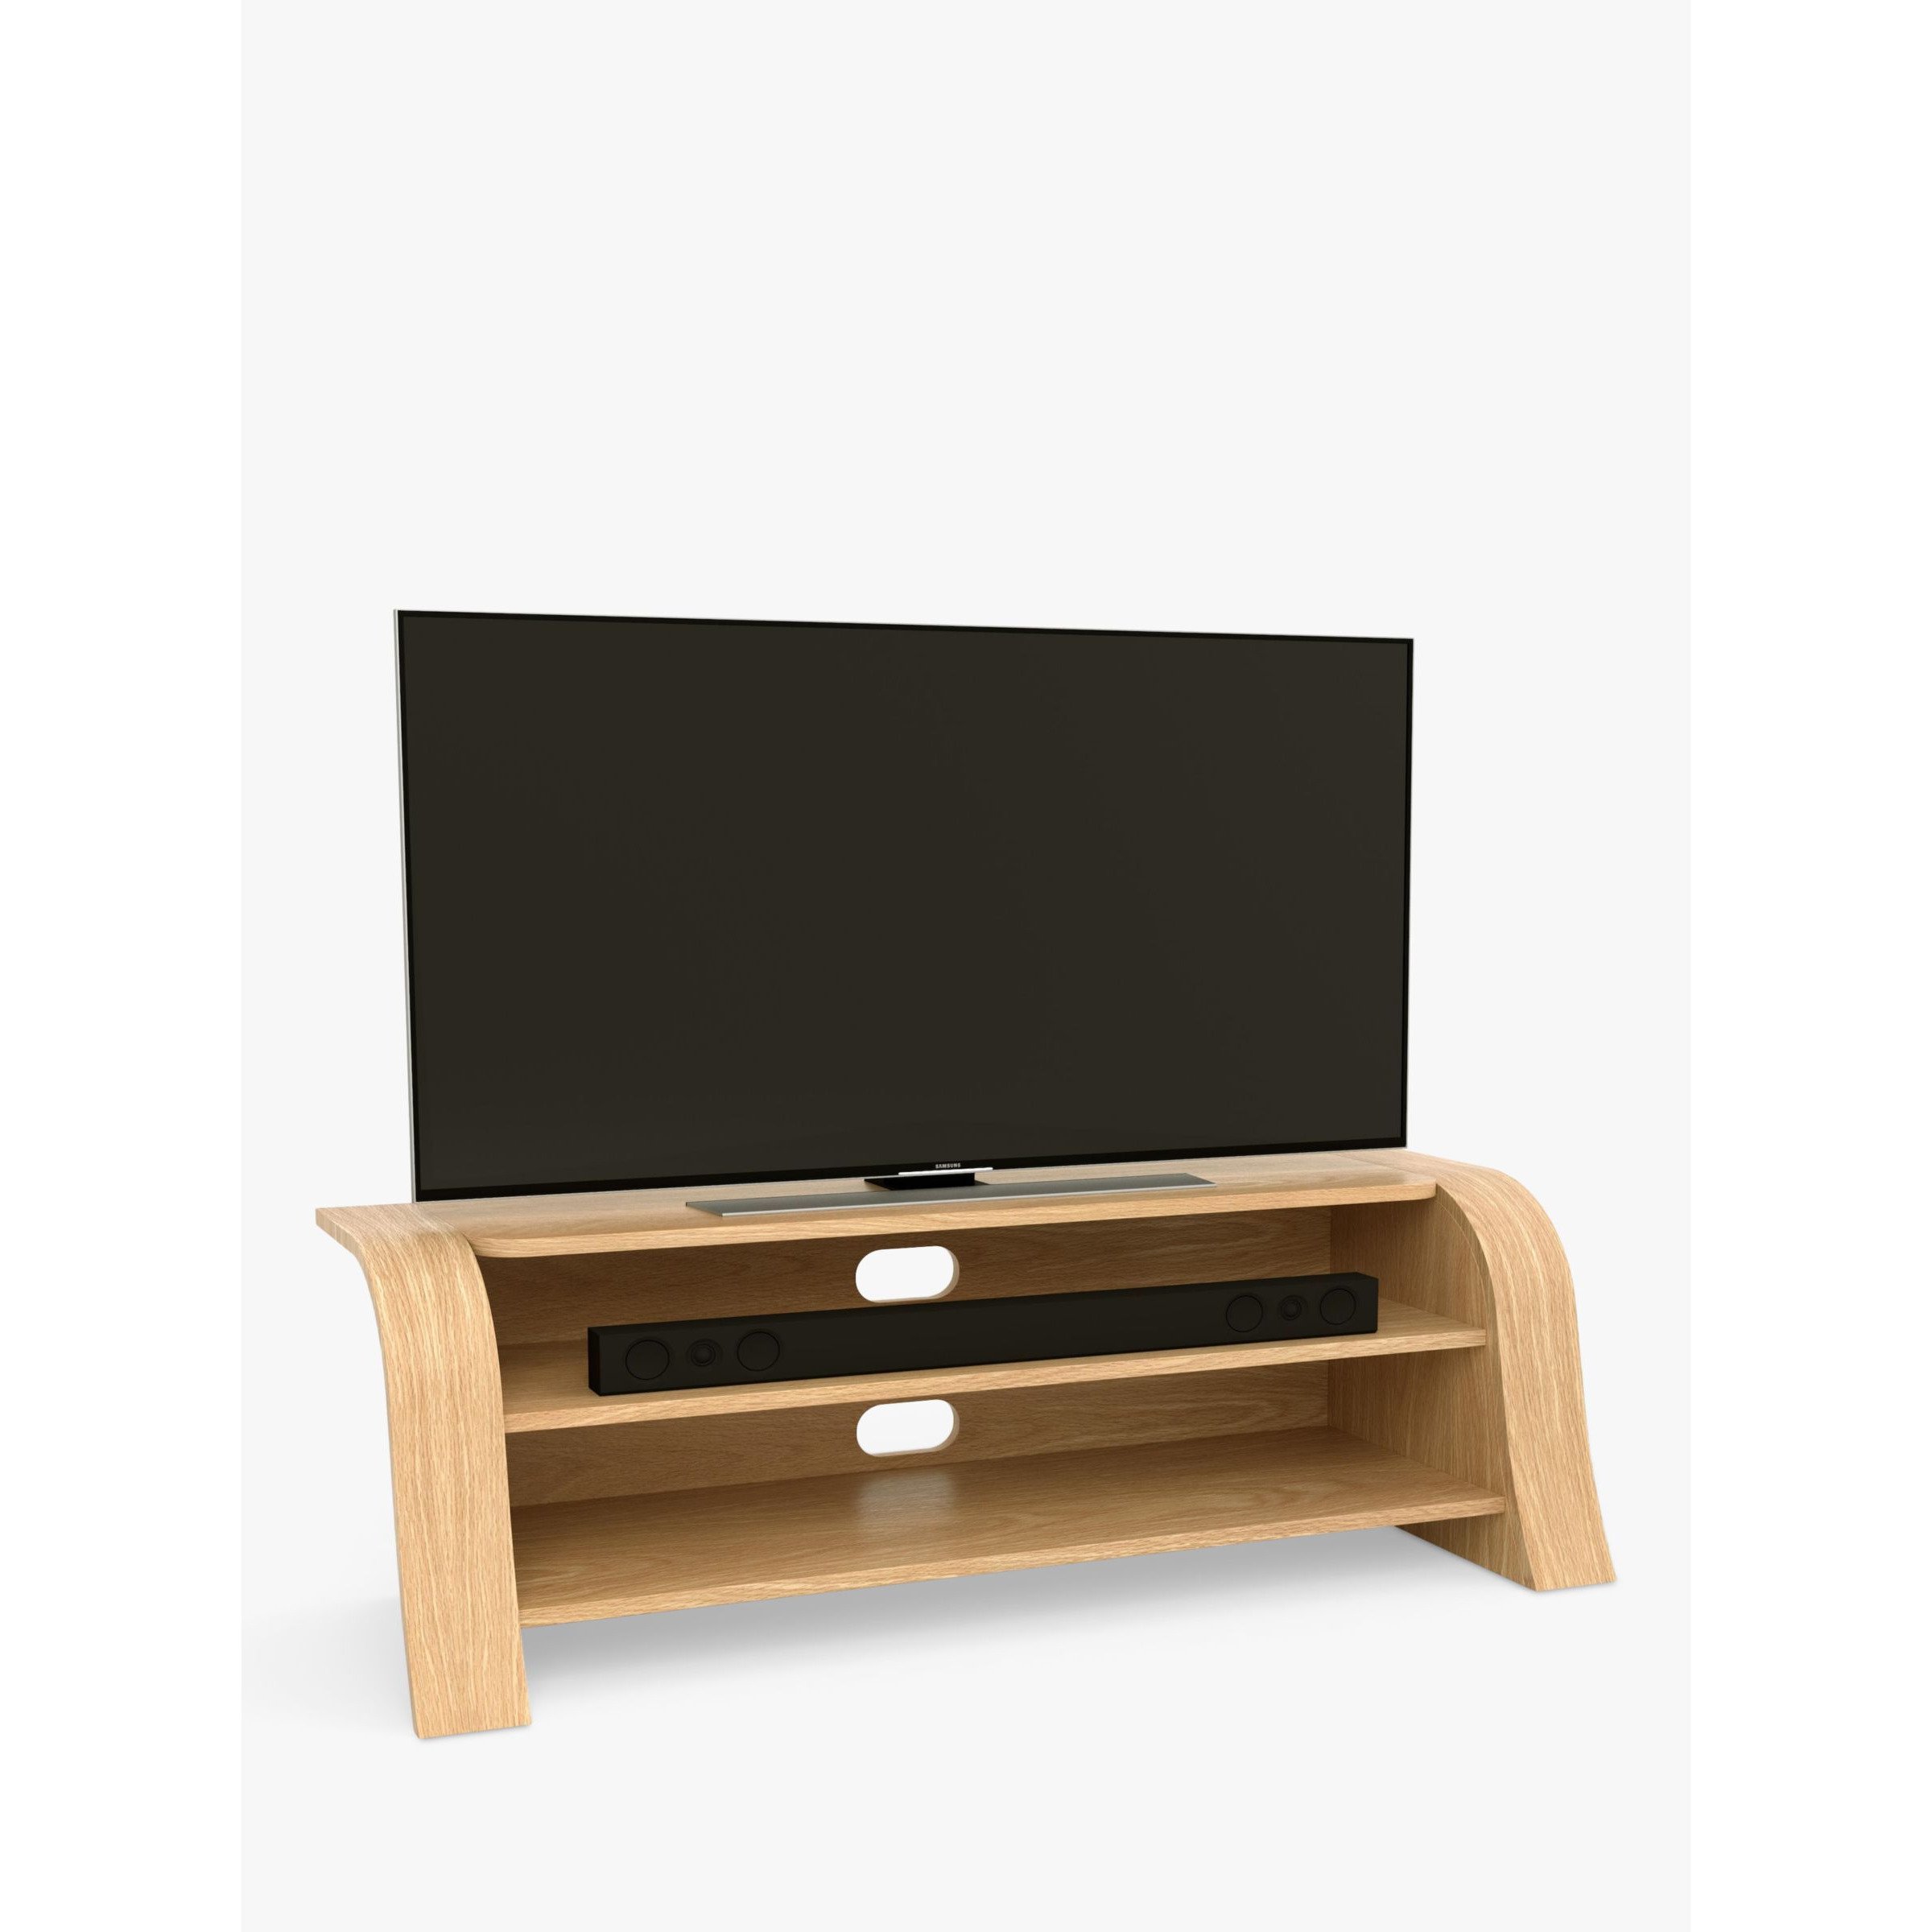 "Tom Schneider Lexi 125 TV Stand for TVs up to 55""" - image 1